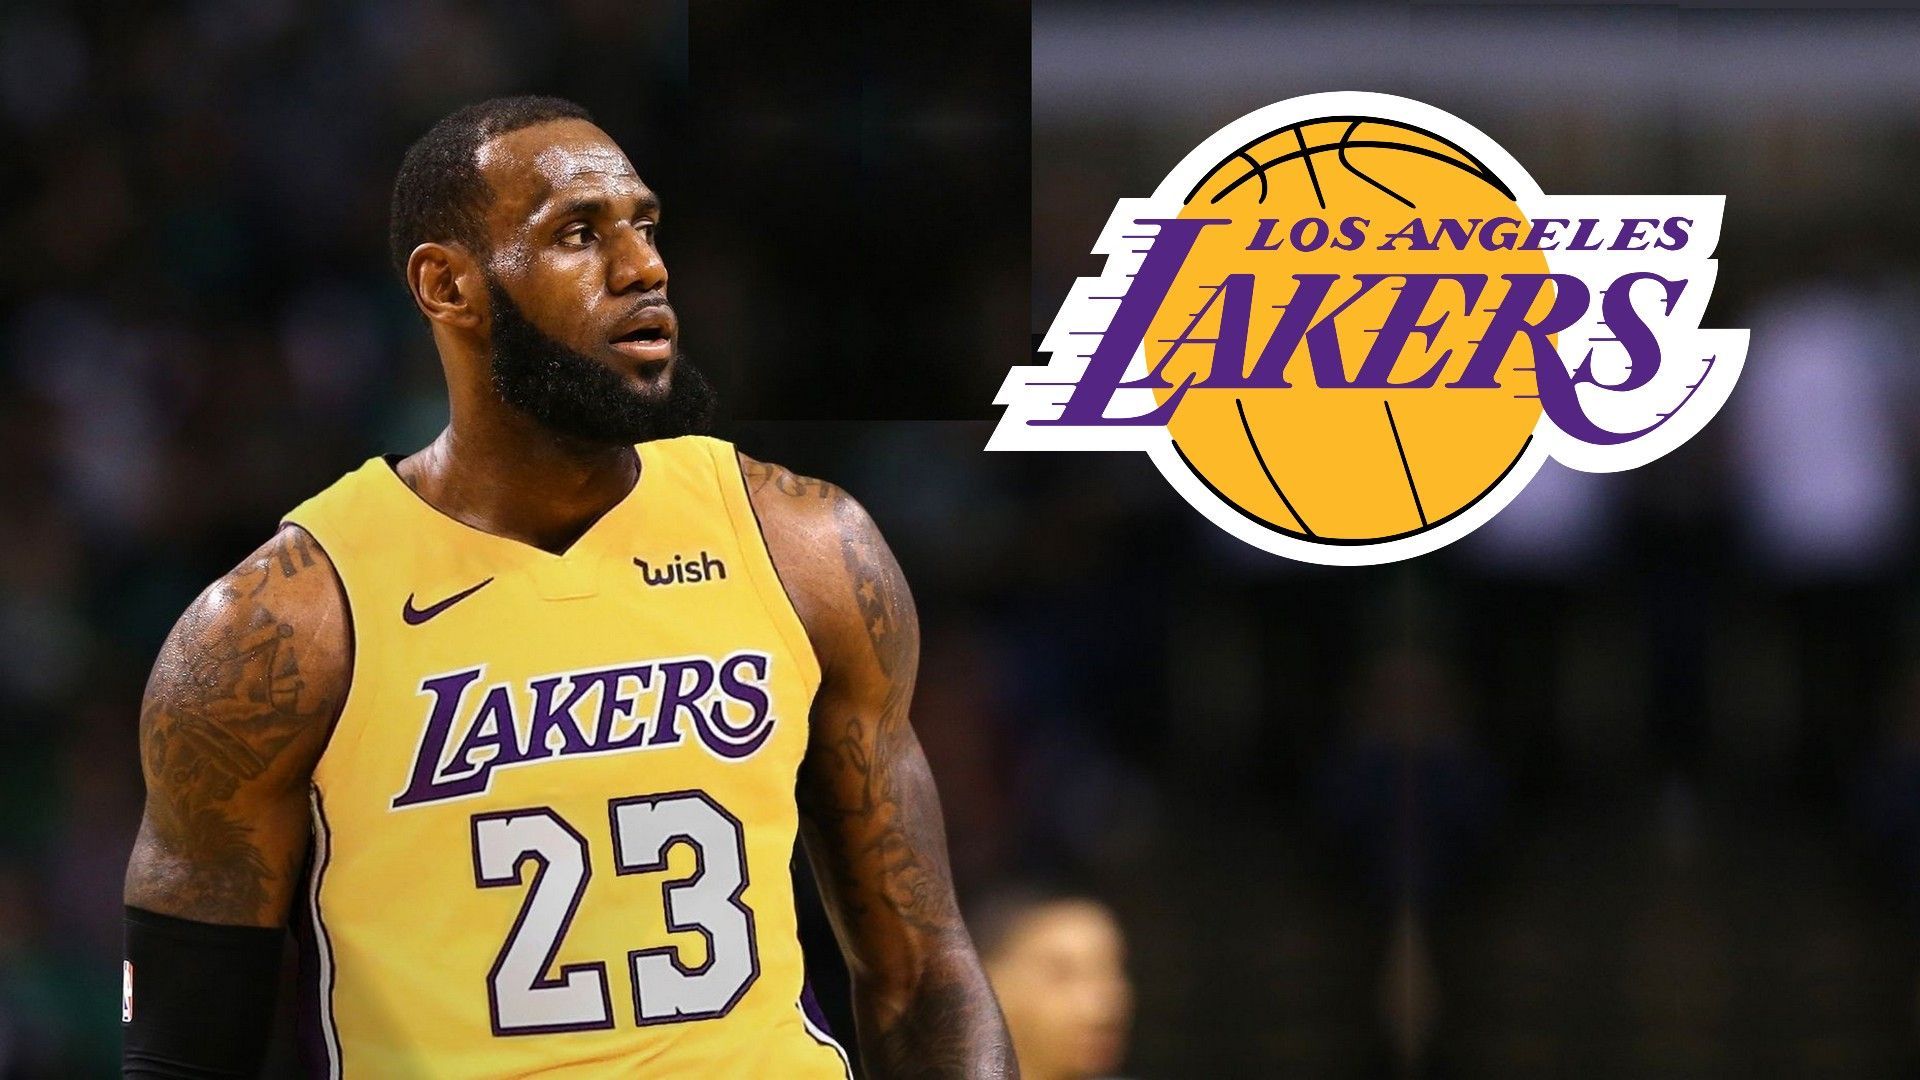 LeBron James Lakers Jersey Desktop Wallpaper is the perfect High